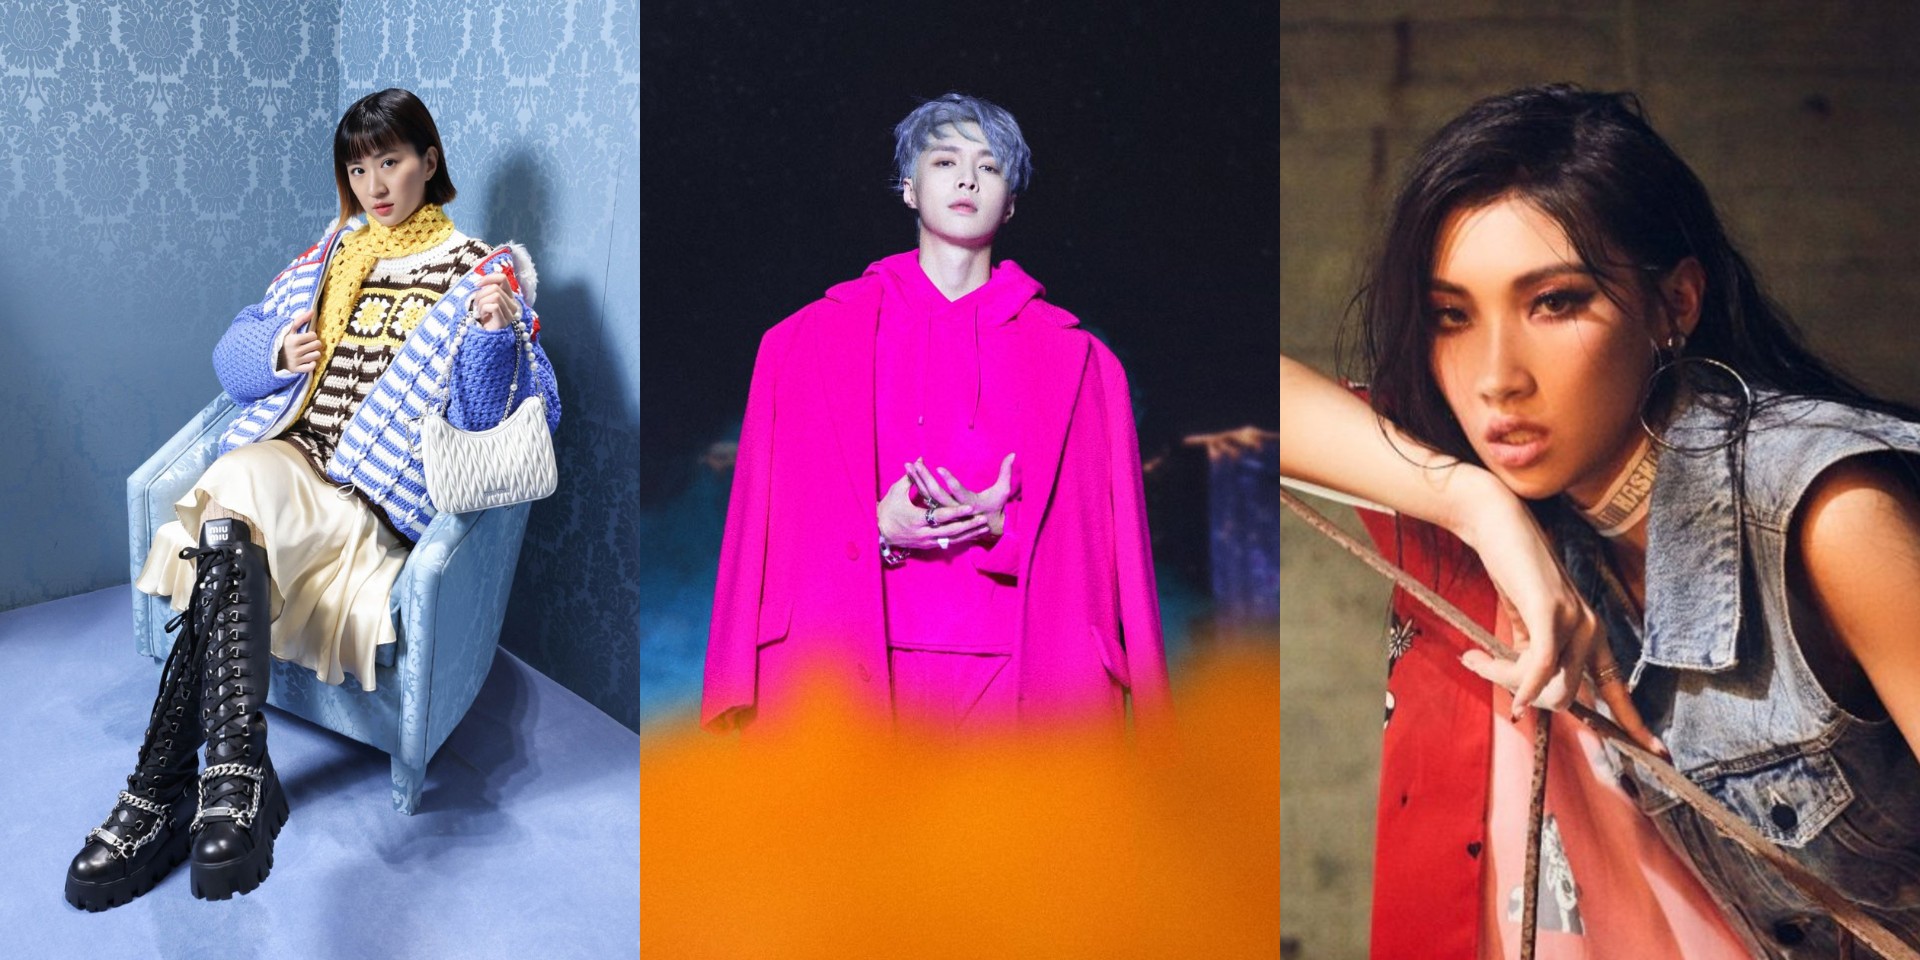 Lay Zhang, 9m88, Karencici, and more to perform at METAMOON Music Festival